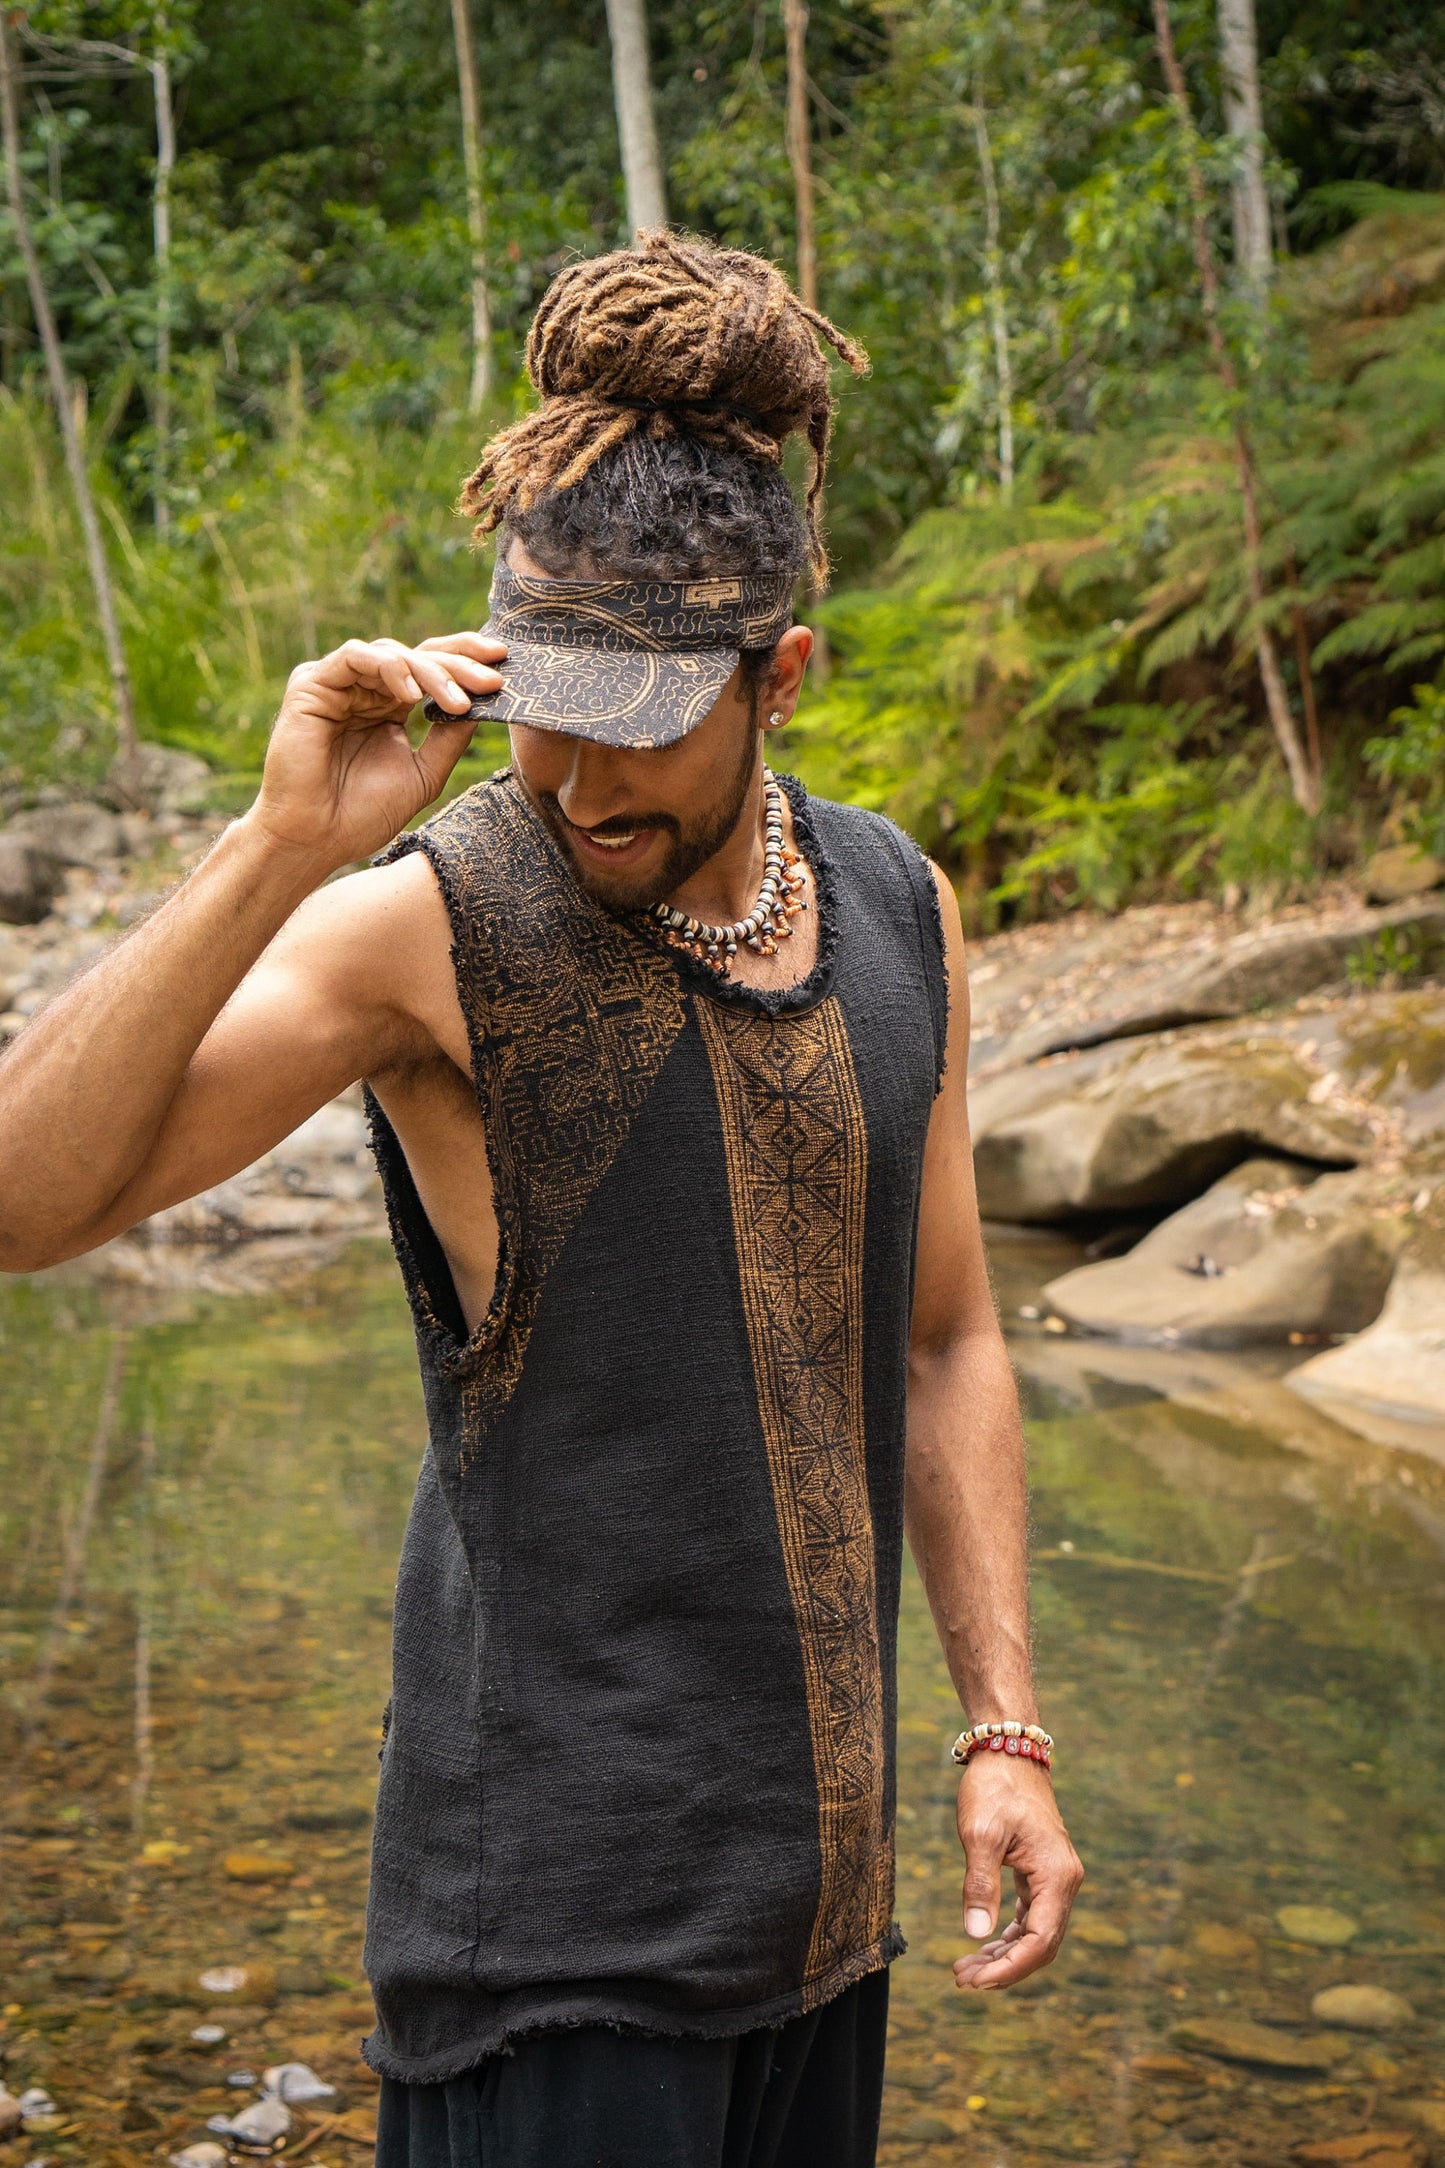 Our AKAU shamanic tank top features intricate block-printed shipibo tribal patterns that are hand-applied, giving each shirt a unique and authentic touch.